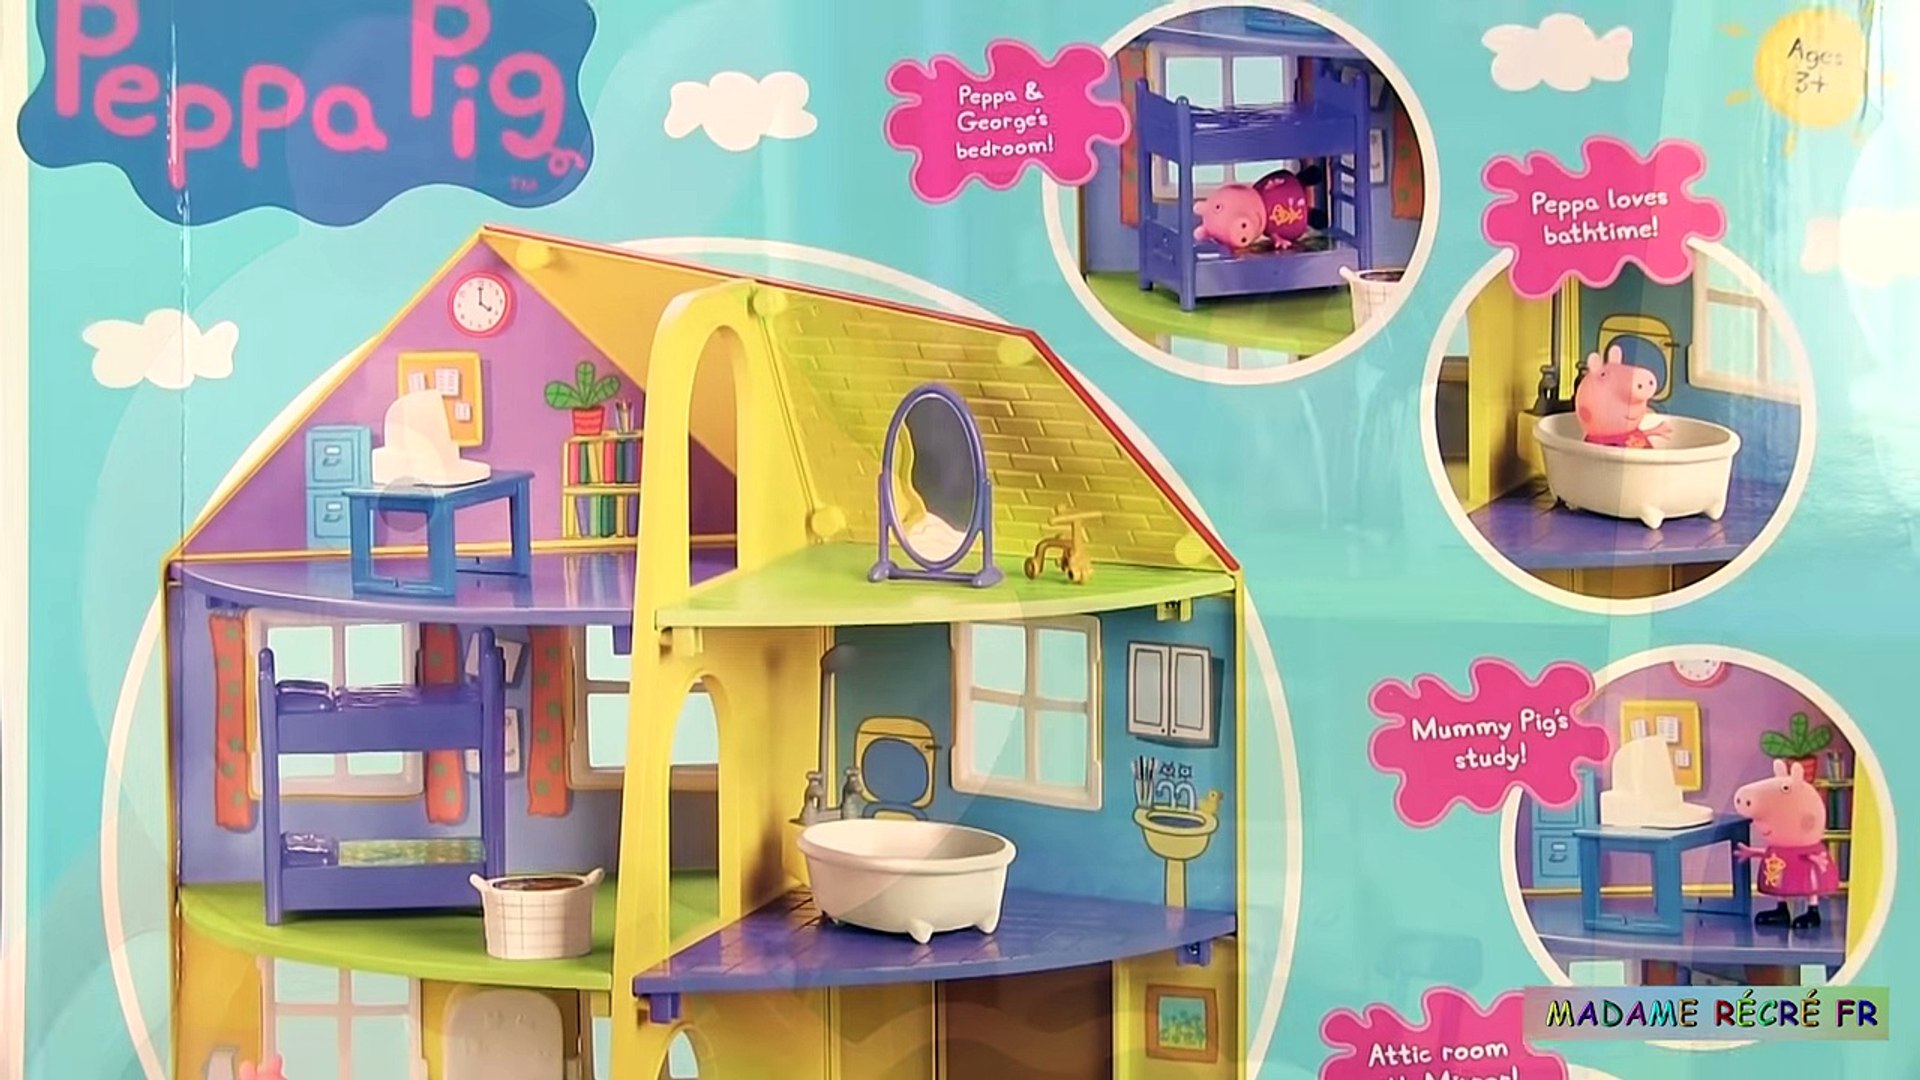 Peppa Pig La Nouvelle Maison Familiale Peppa S Family Home Jouet Youtube Video Dailymotion